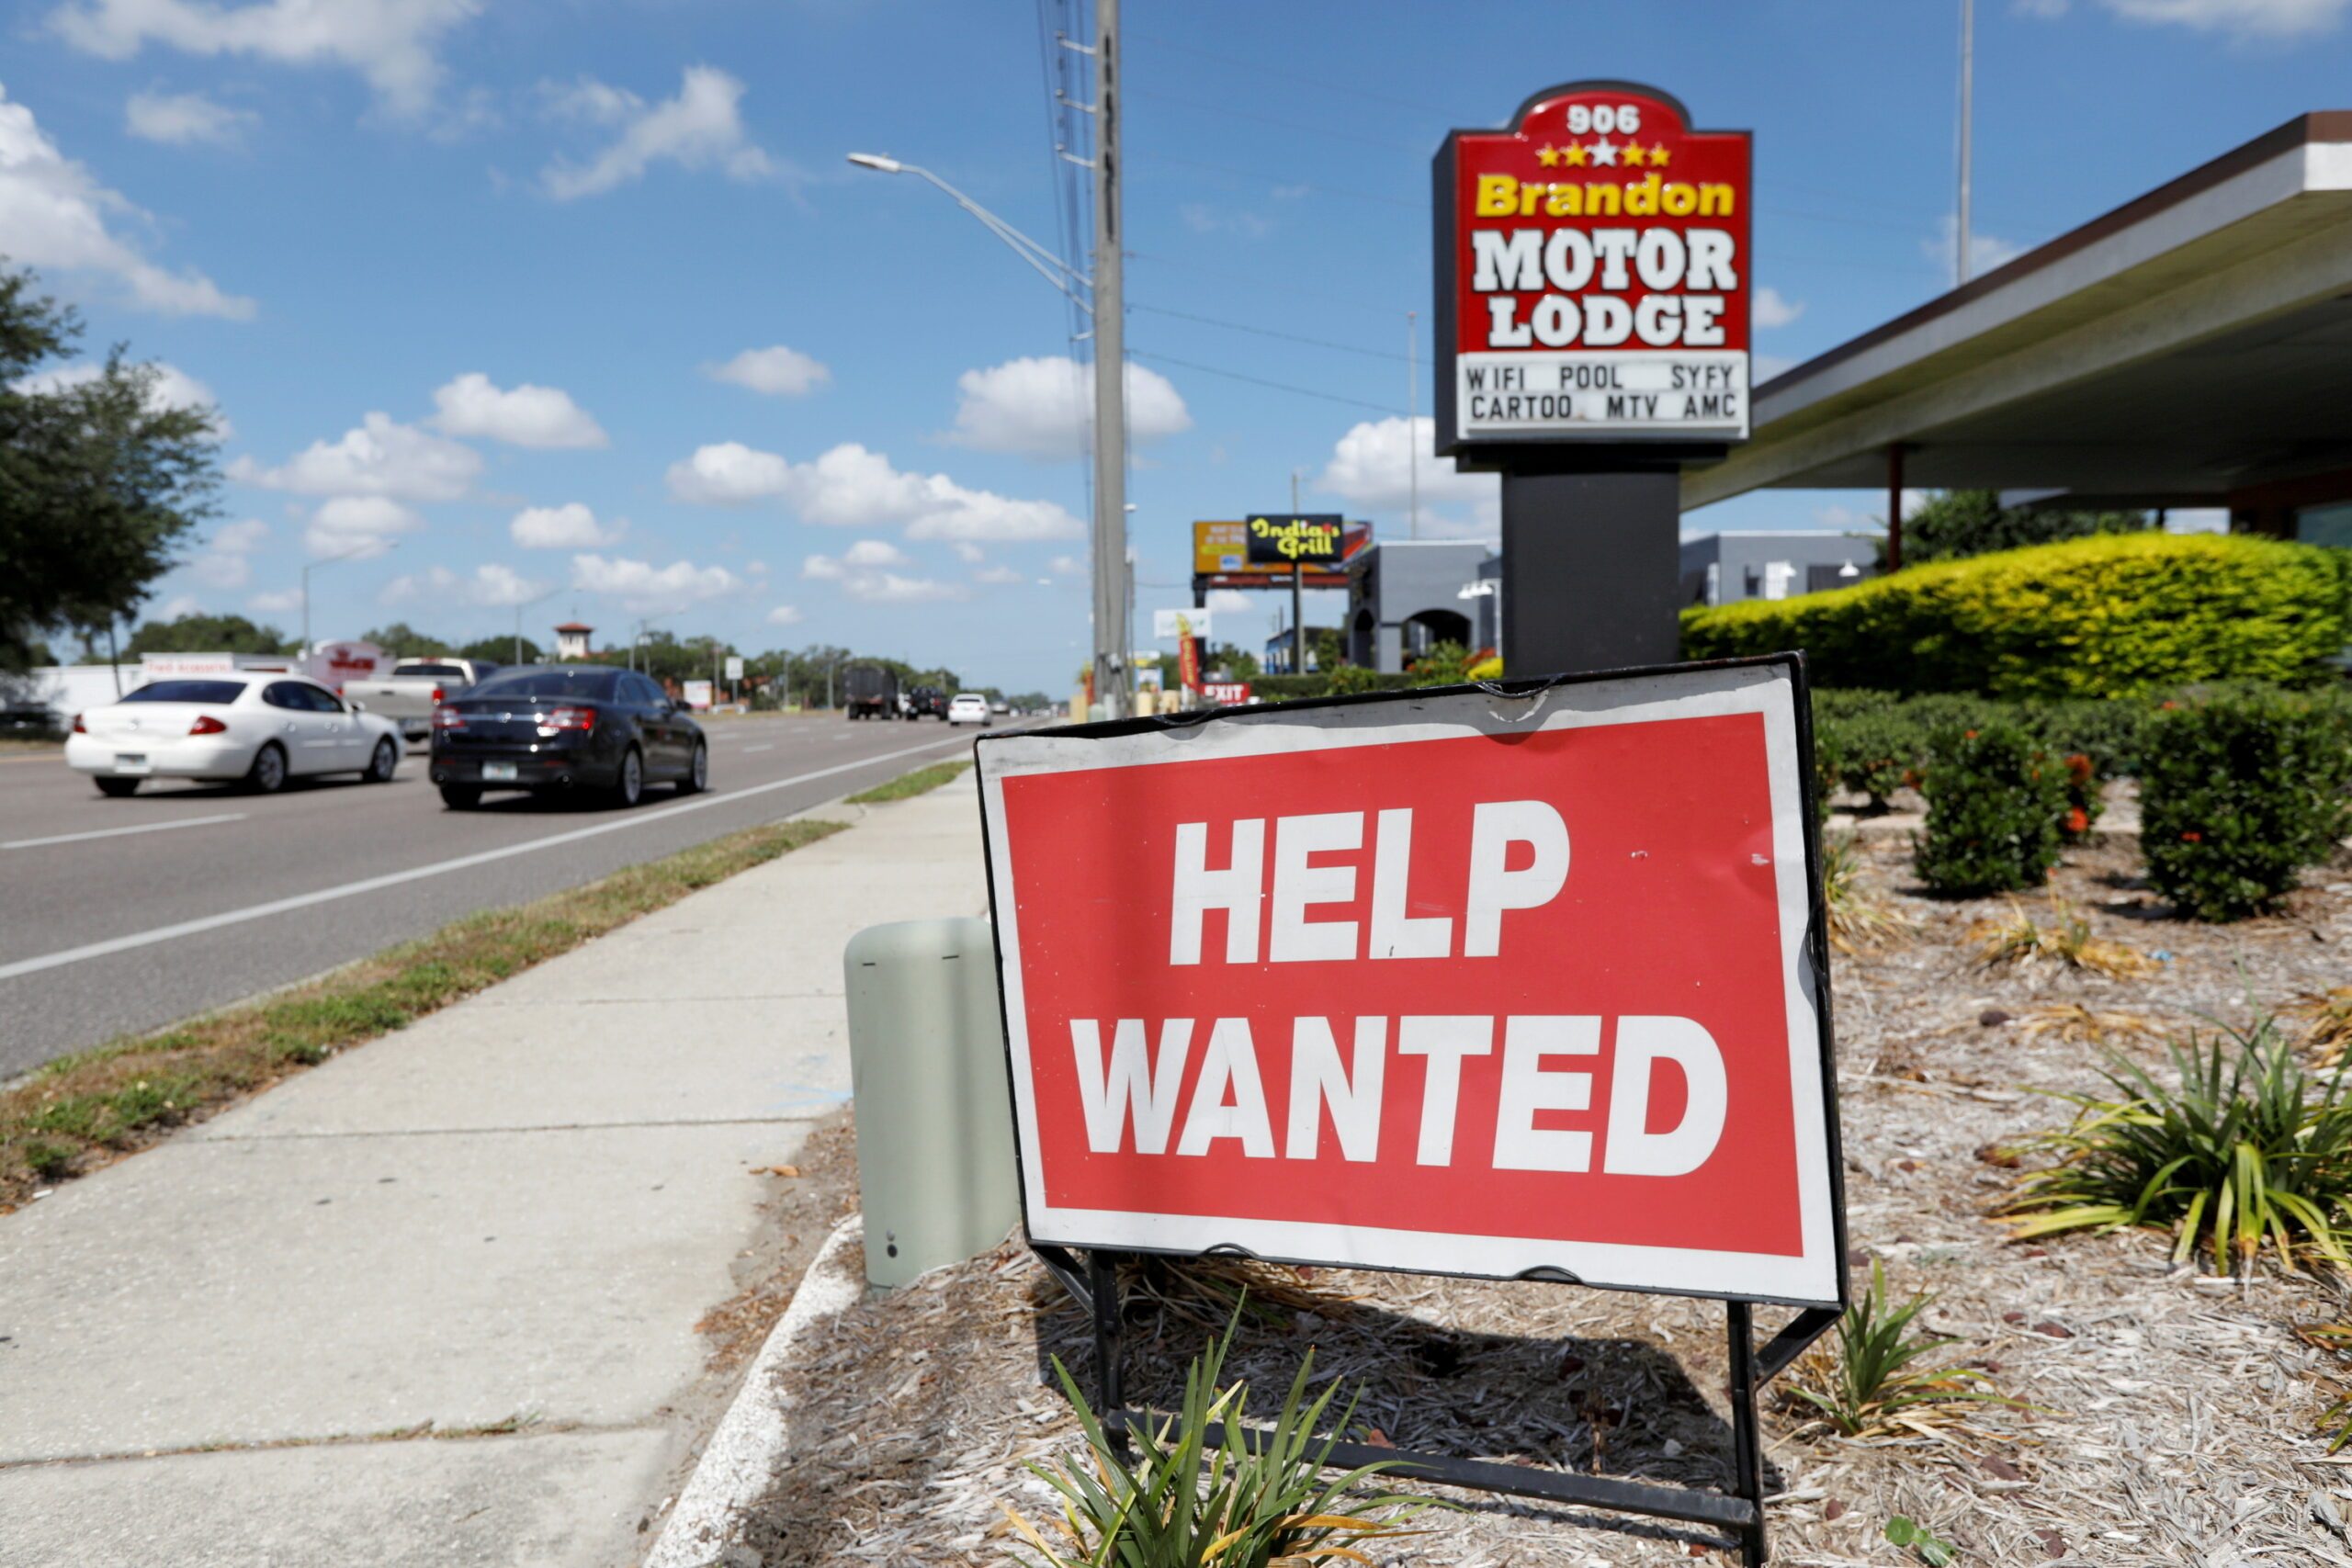 US labor market tightening; jobless rate flirts with pre-pandemic lows